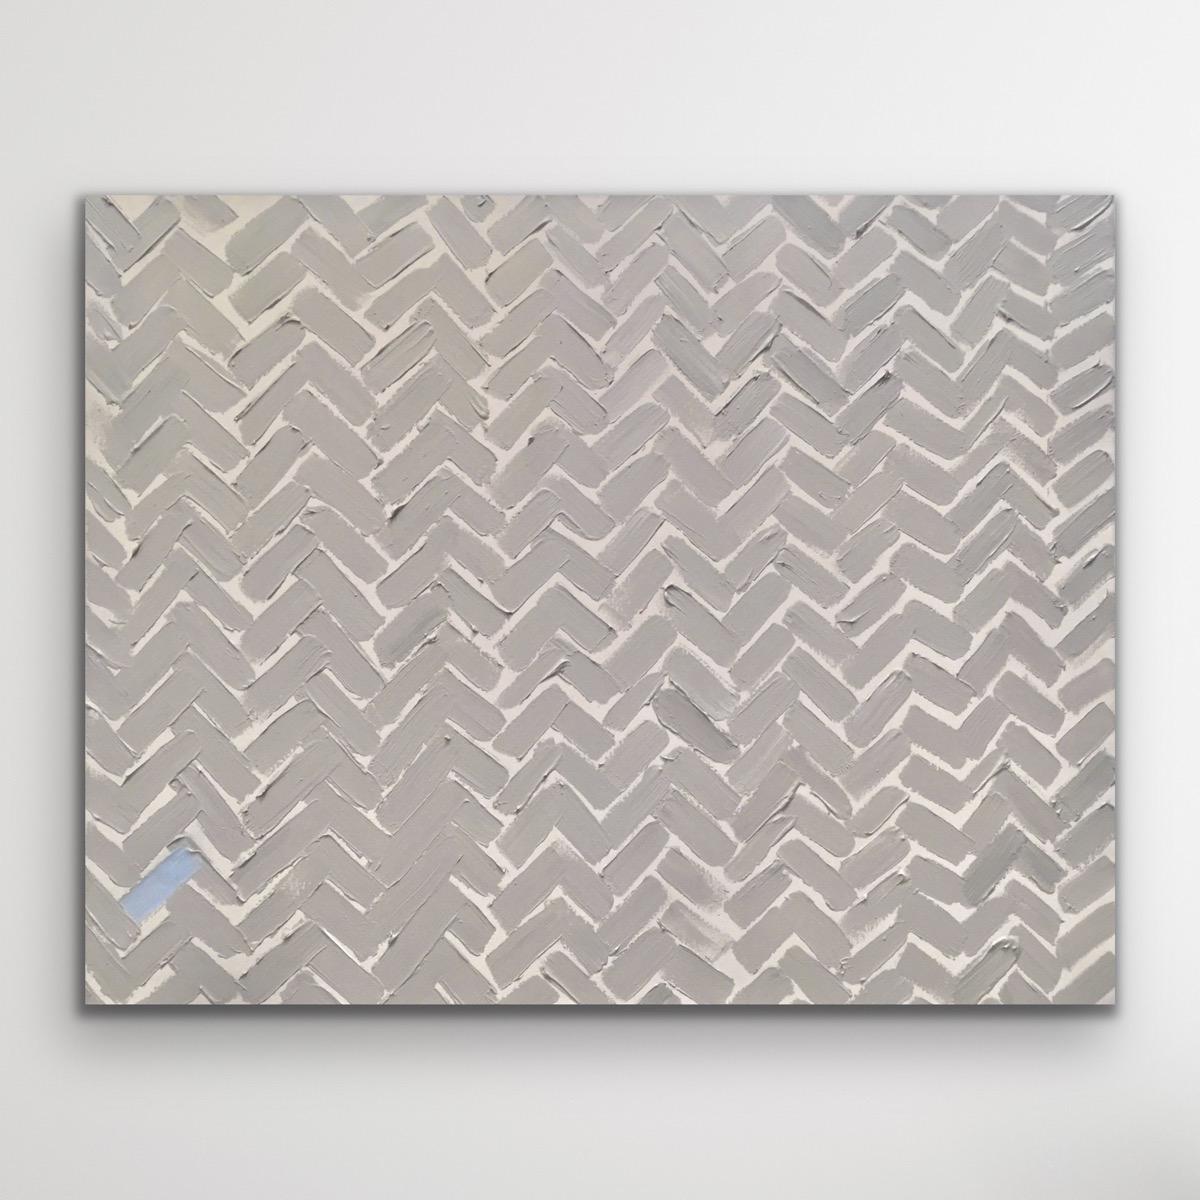 Contemporary abstract painting where emphasis is put on simplified composition. A heavy textured, herringbone pattern using lush brush stokes creates dimension drawing the viewer in. The restrained palette with a hint of blue makes for a minimalist